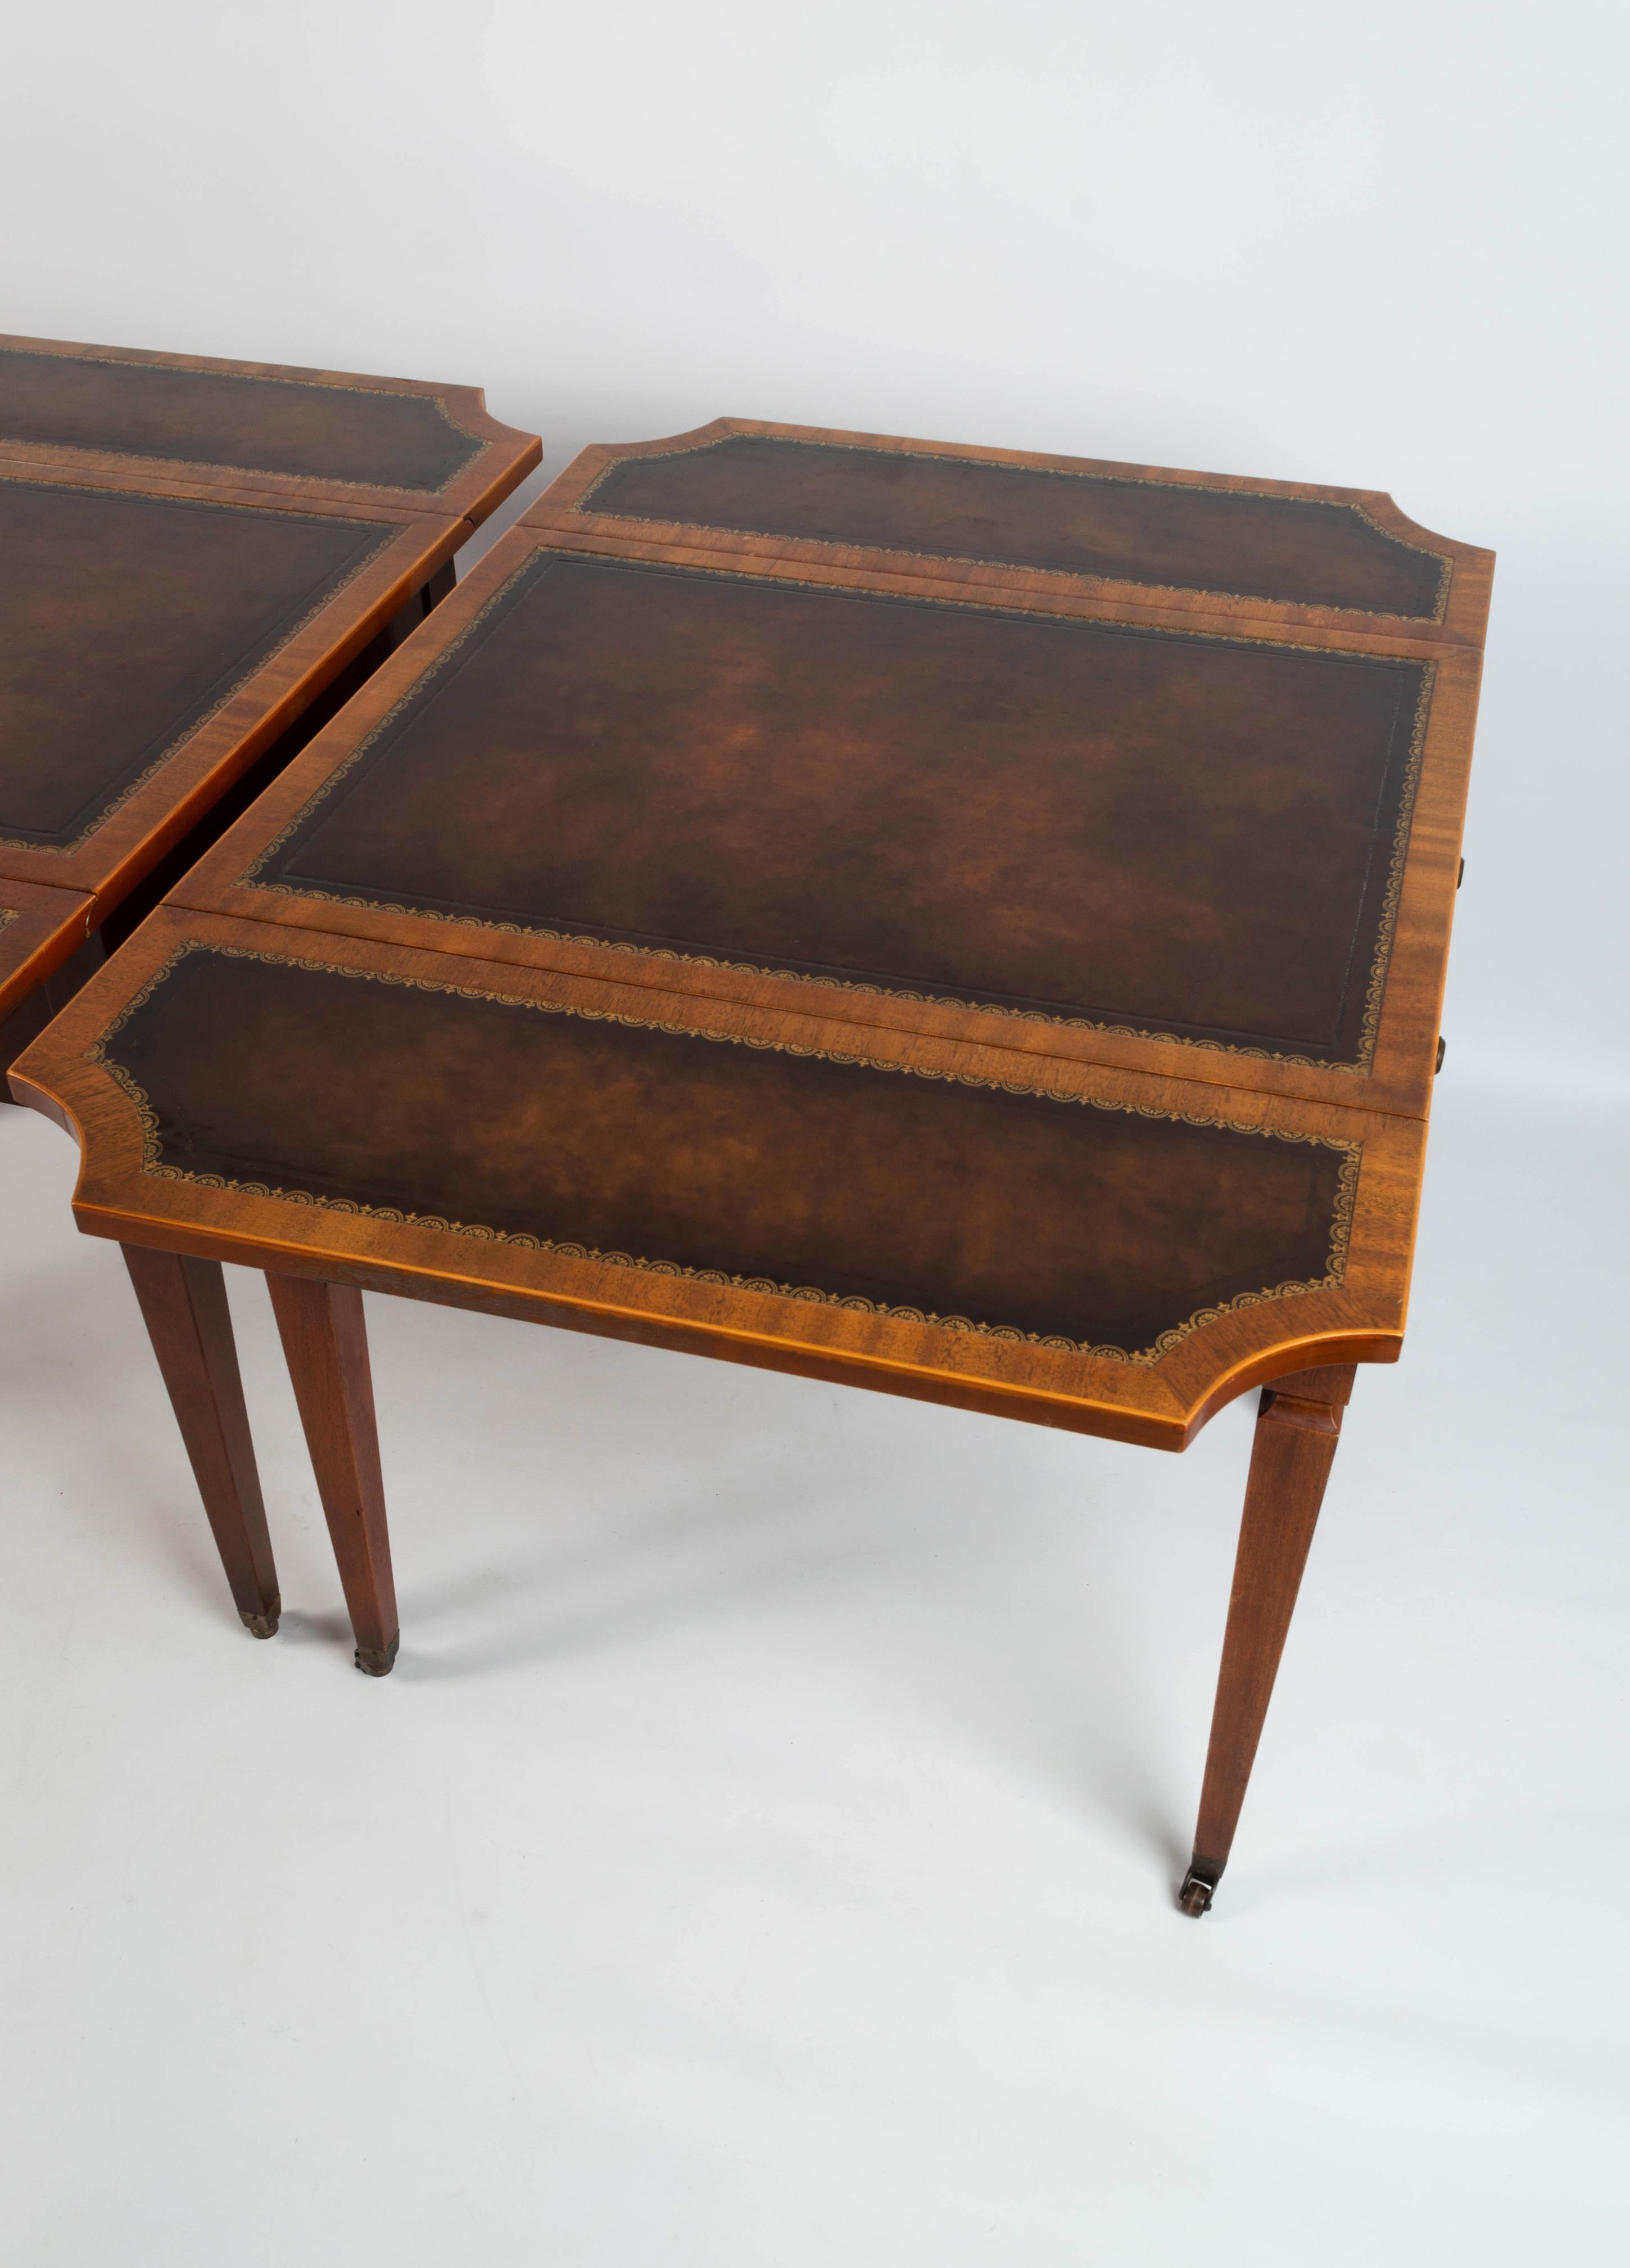 Pair English Georgian 18th Century Revival Leather Inset Drop Leaf Sofa Tables For Sale 6